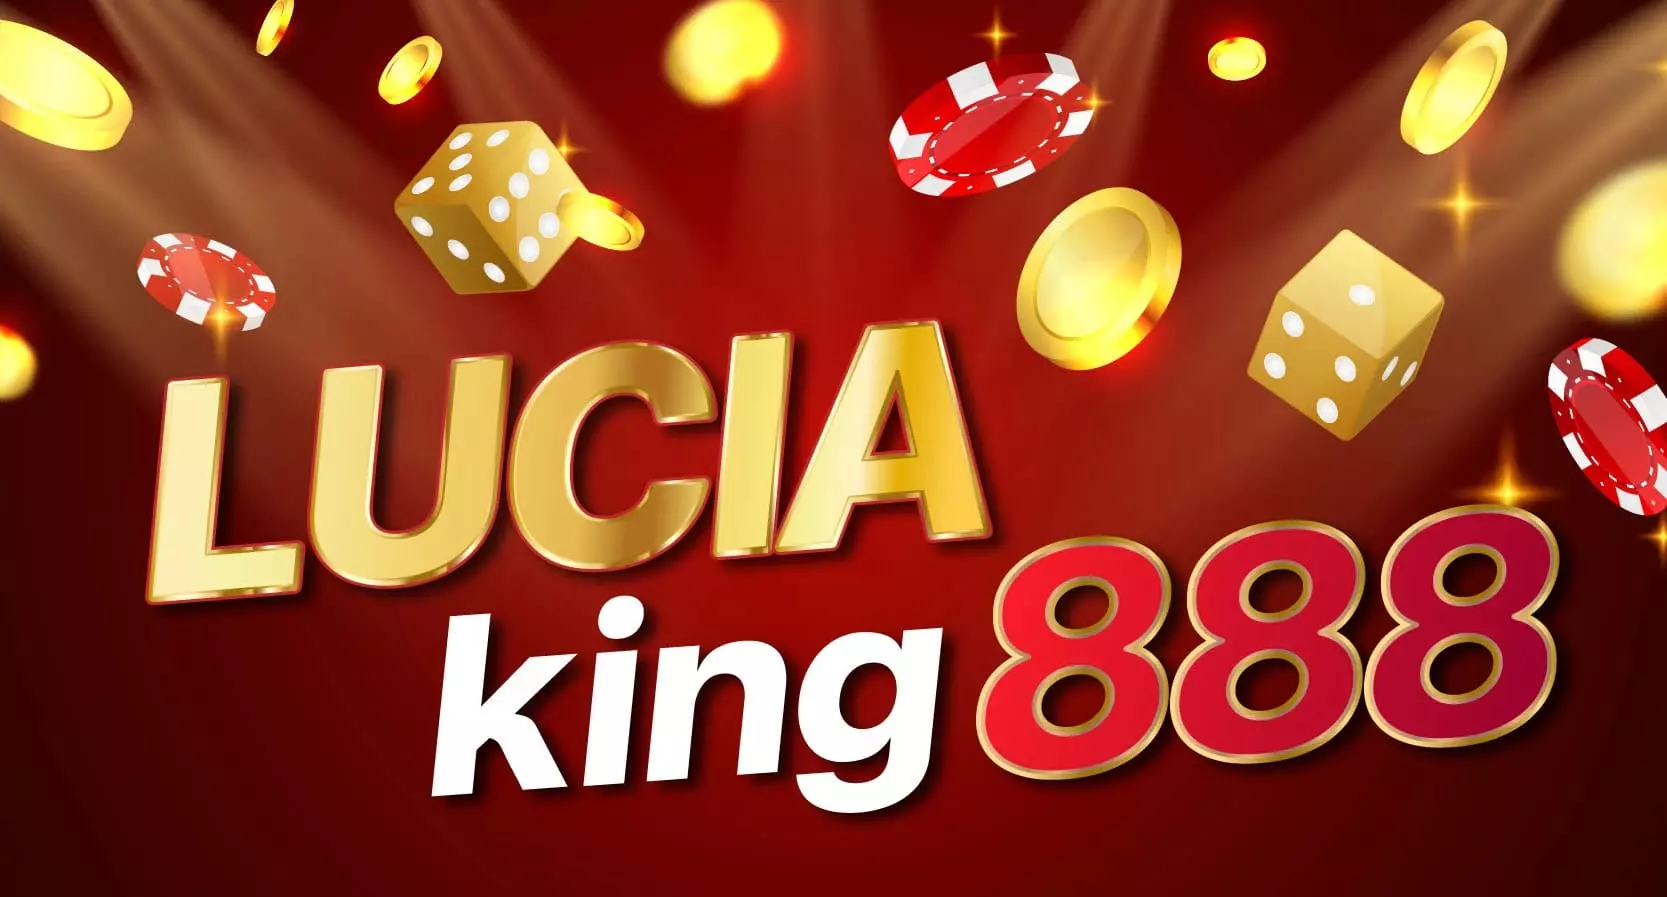 LUCIAking888